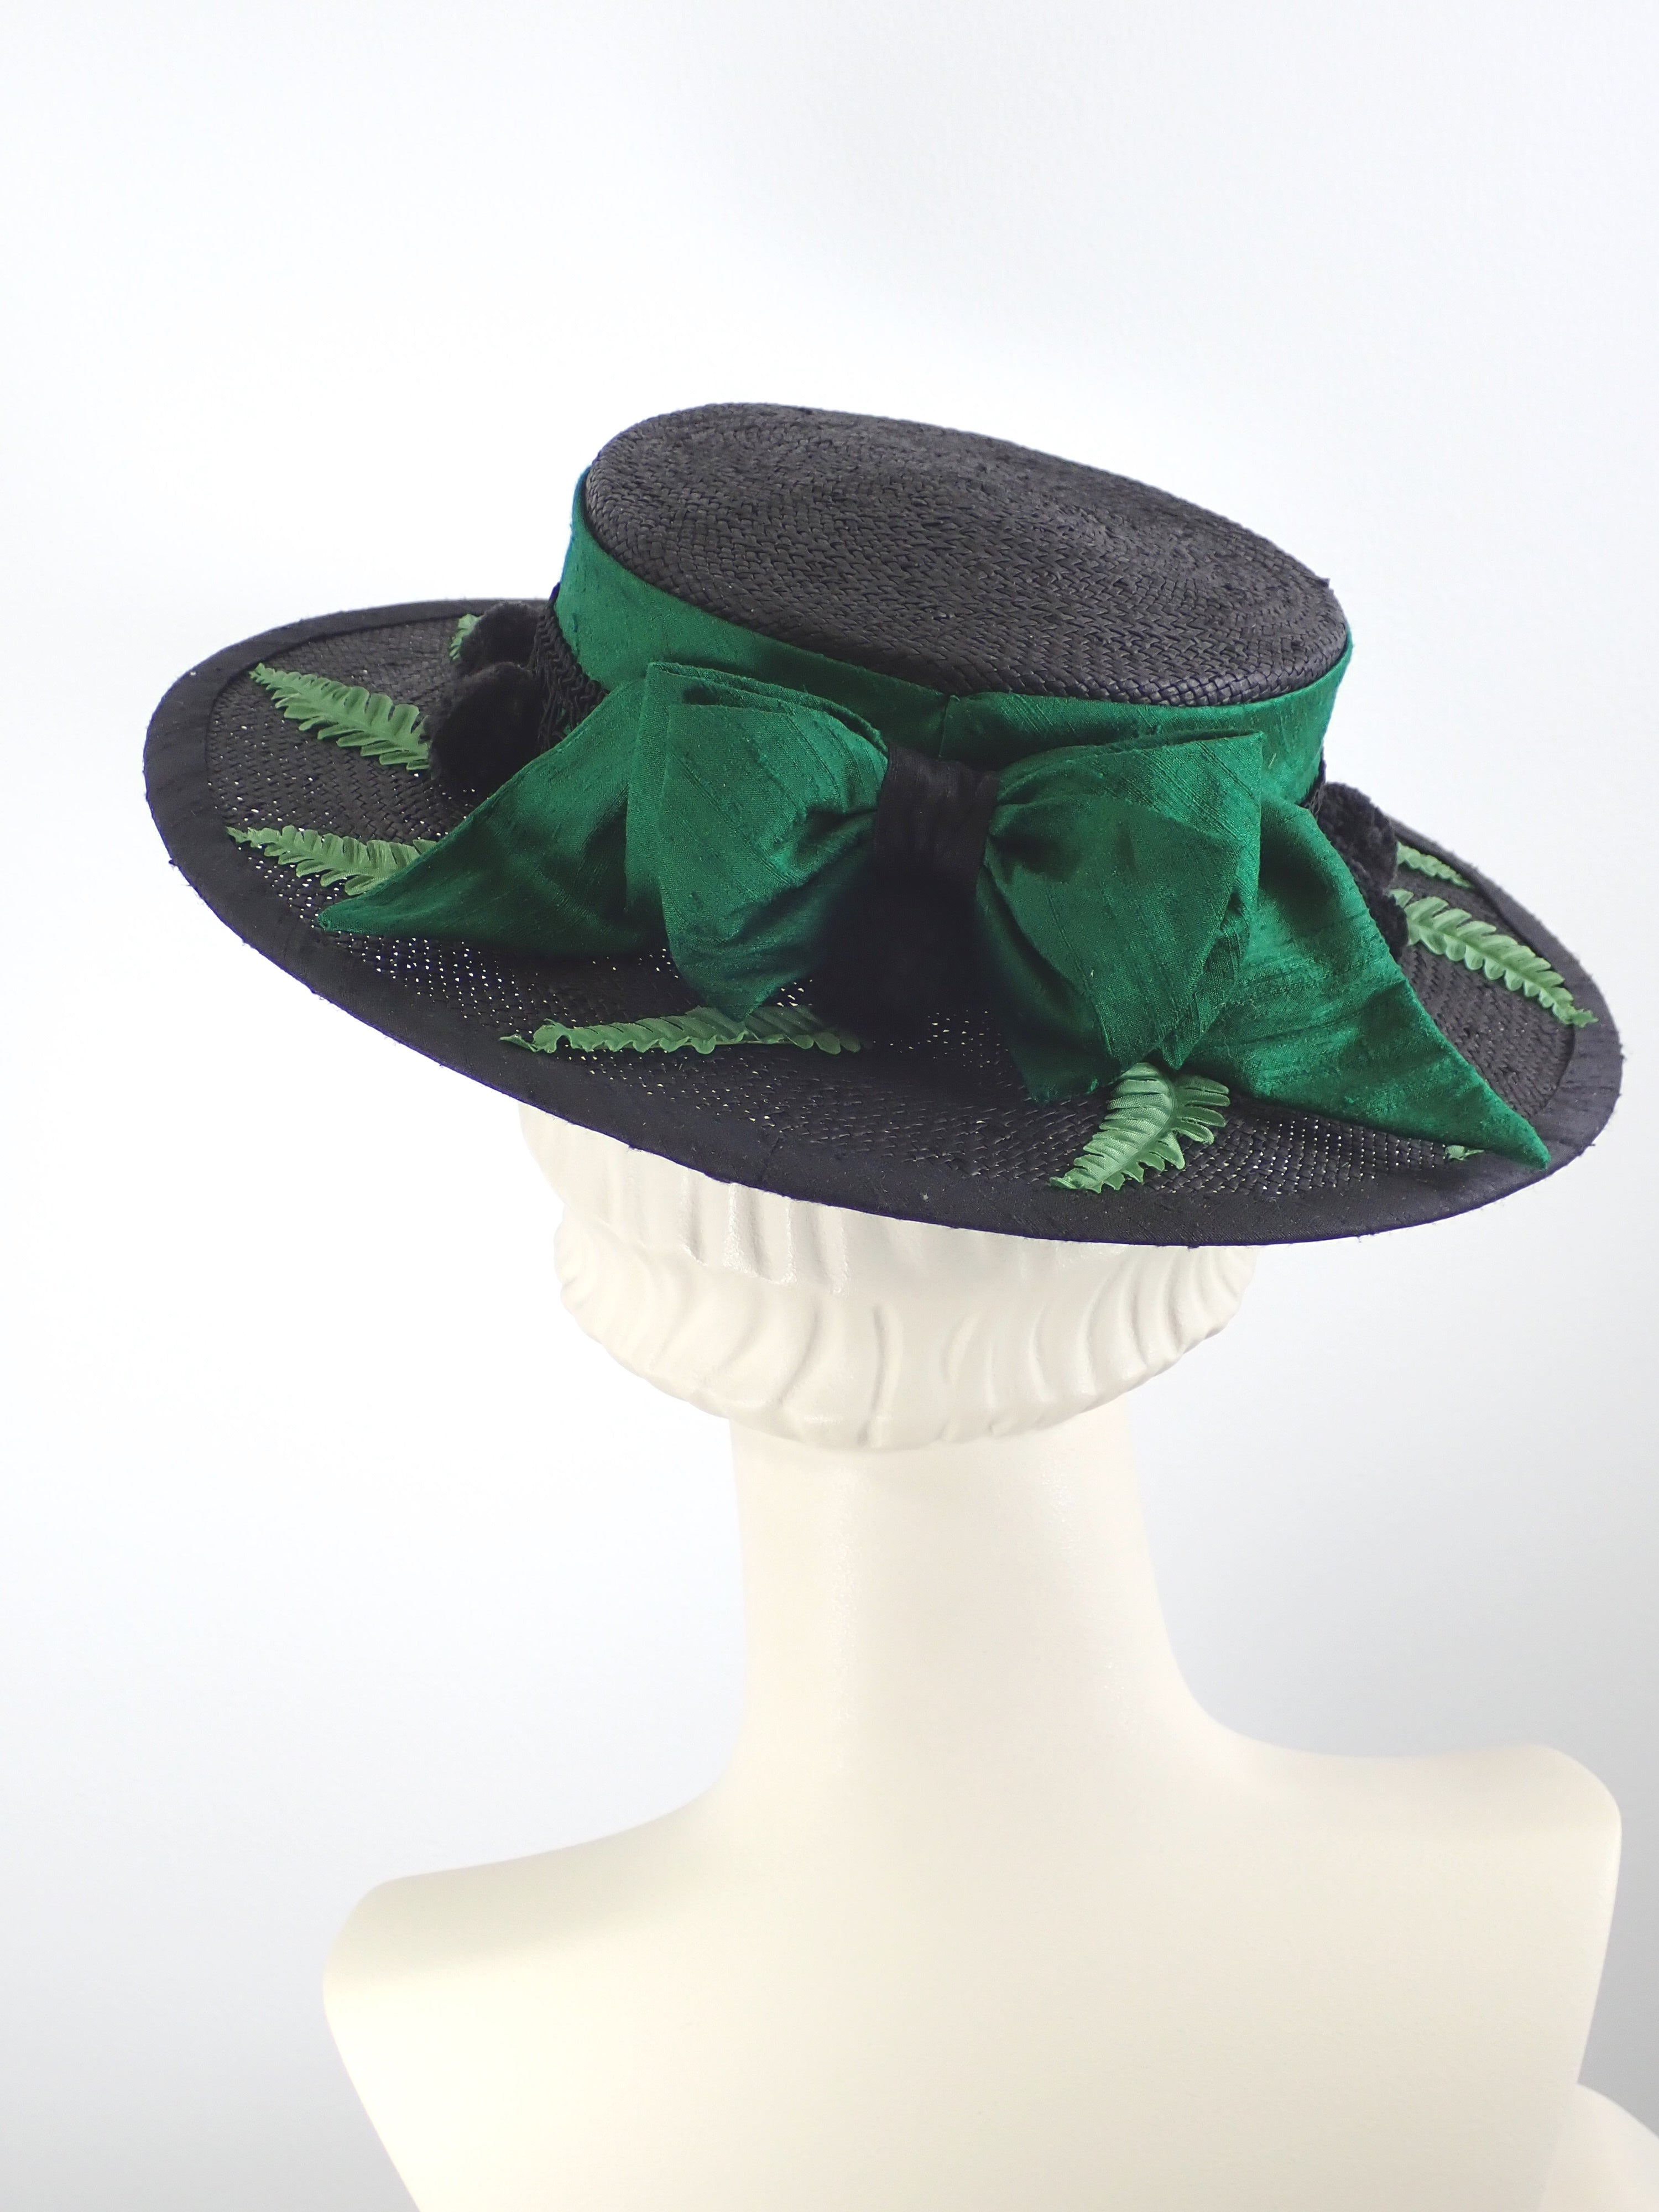 Black Straw Boater Hat for Women with Green Silk Band